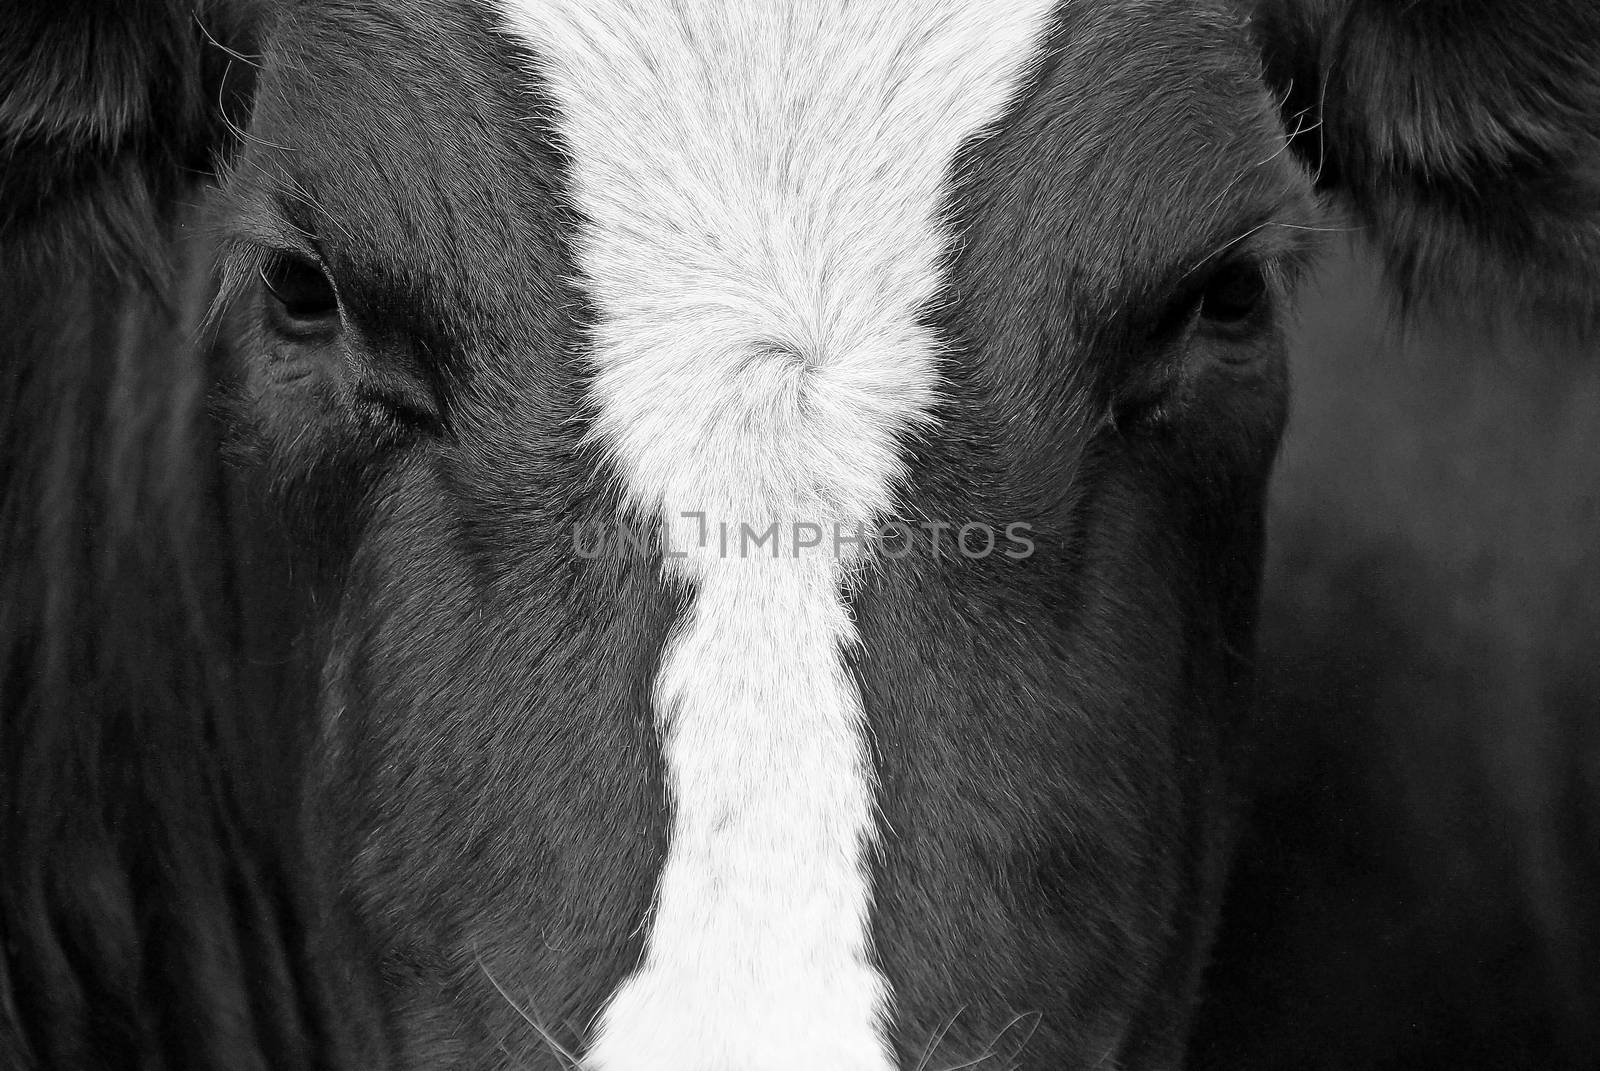 A close up of a portrait from a black-and-white cow.